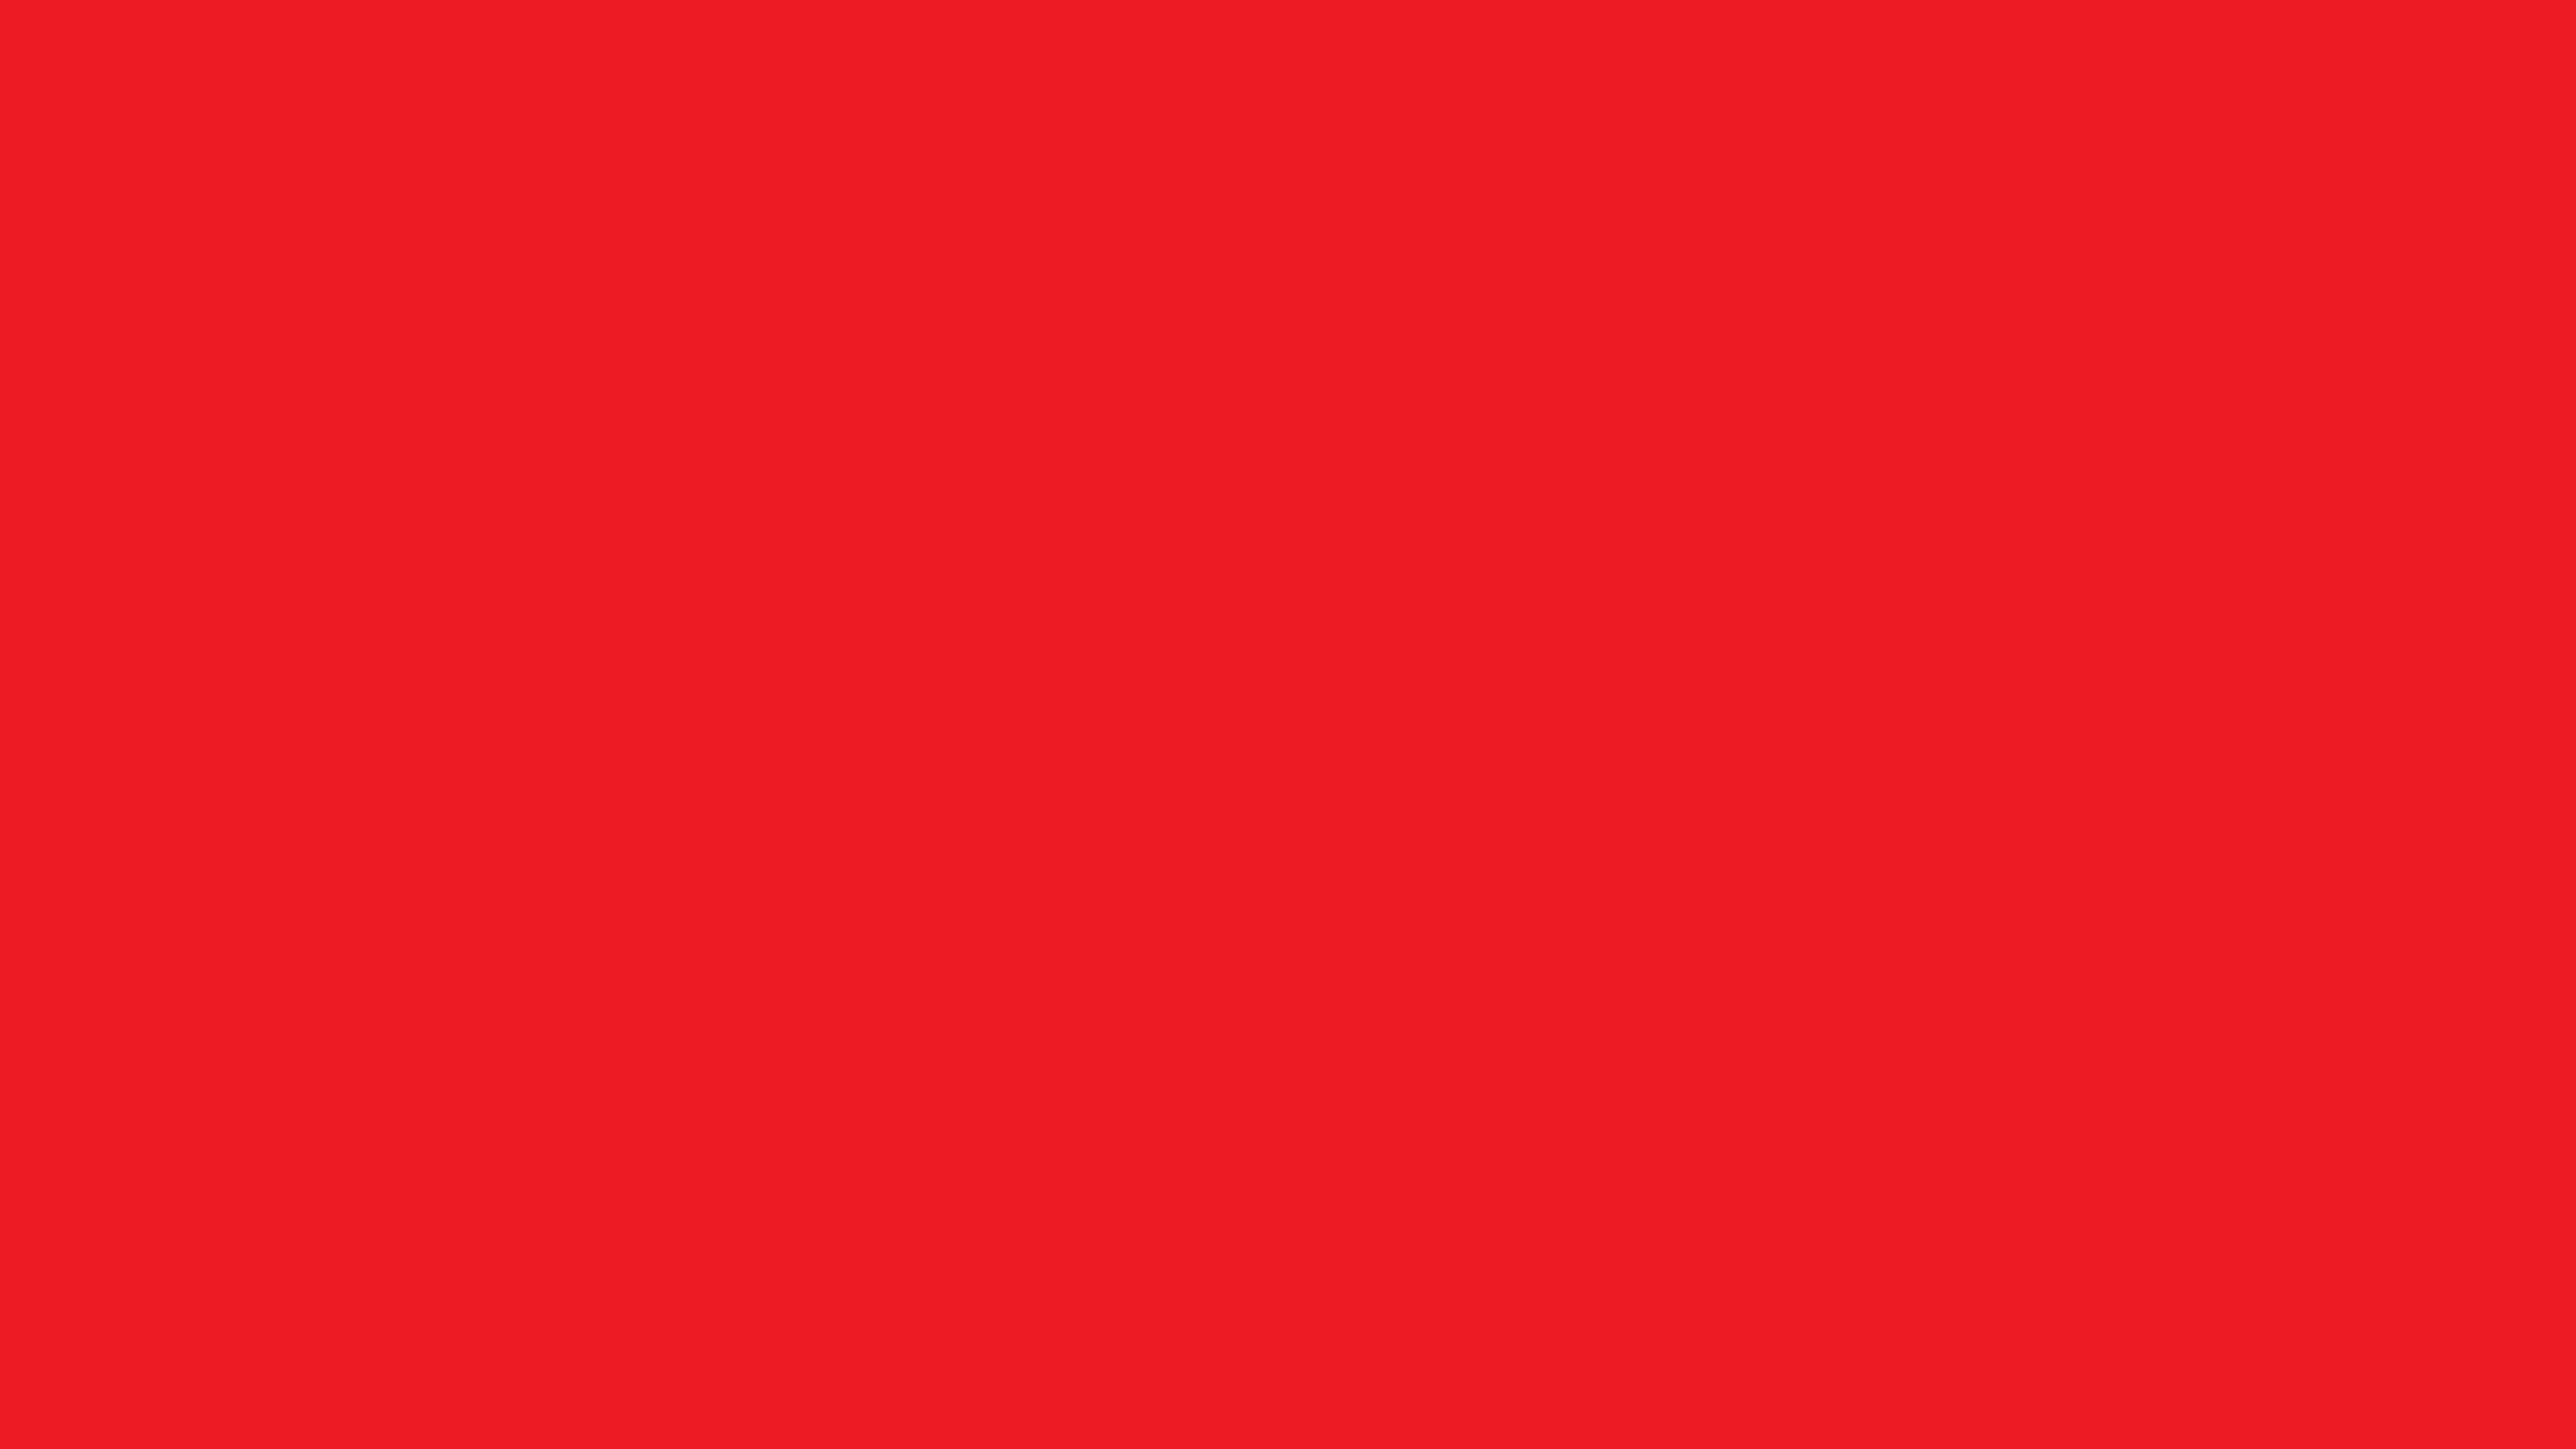 5120x2880 Red Pigment Solid Color Background